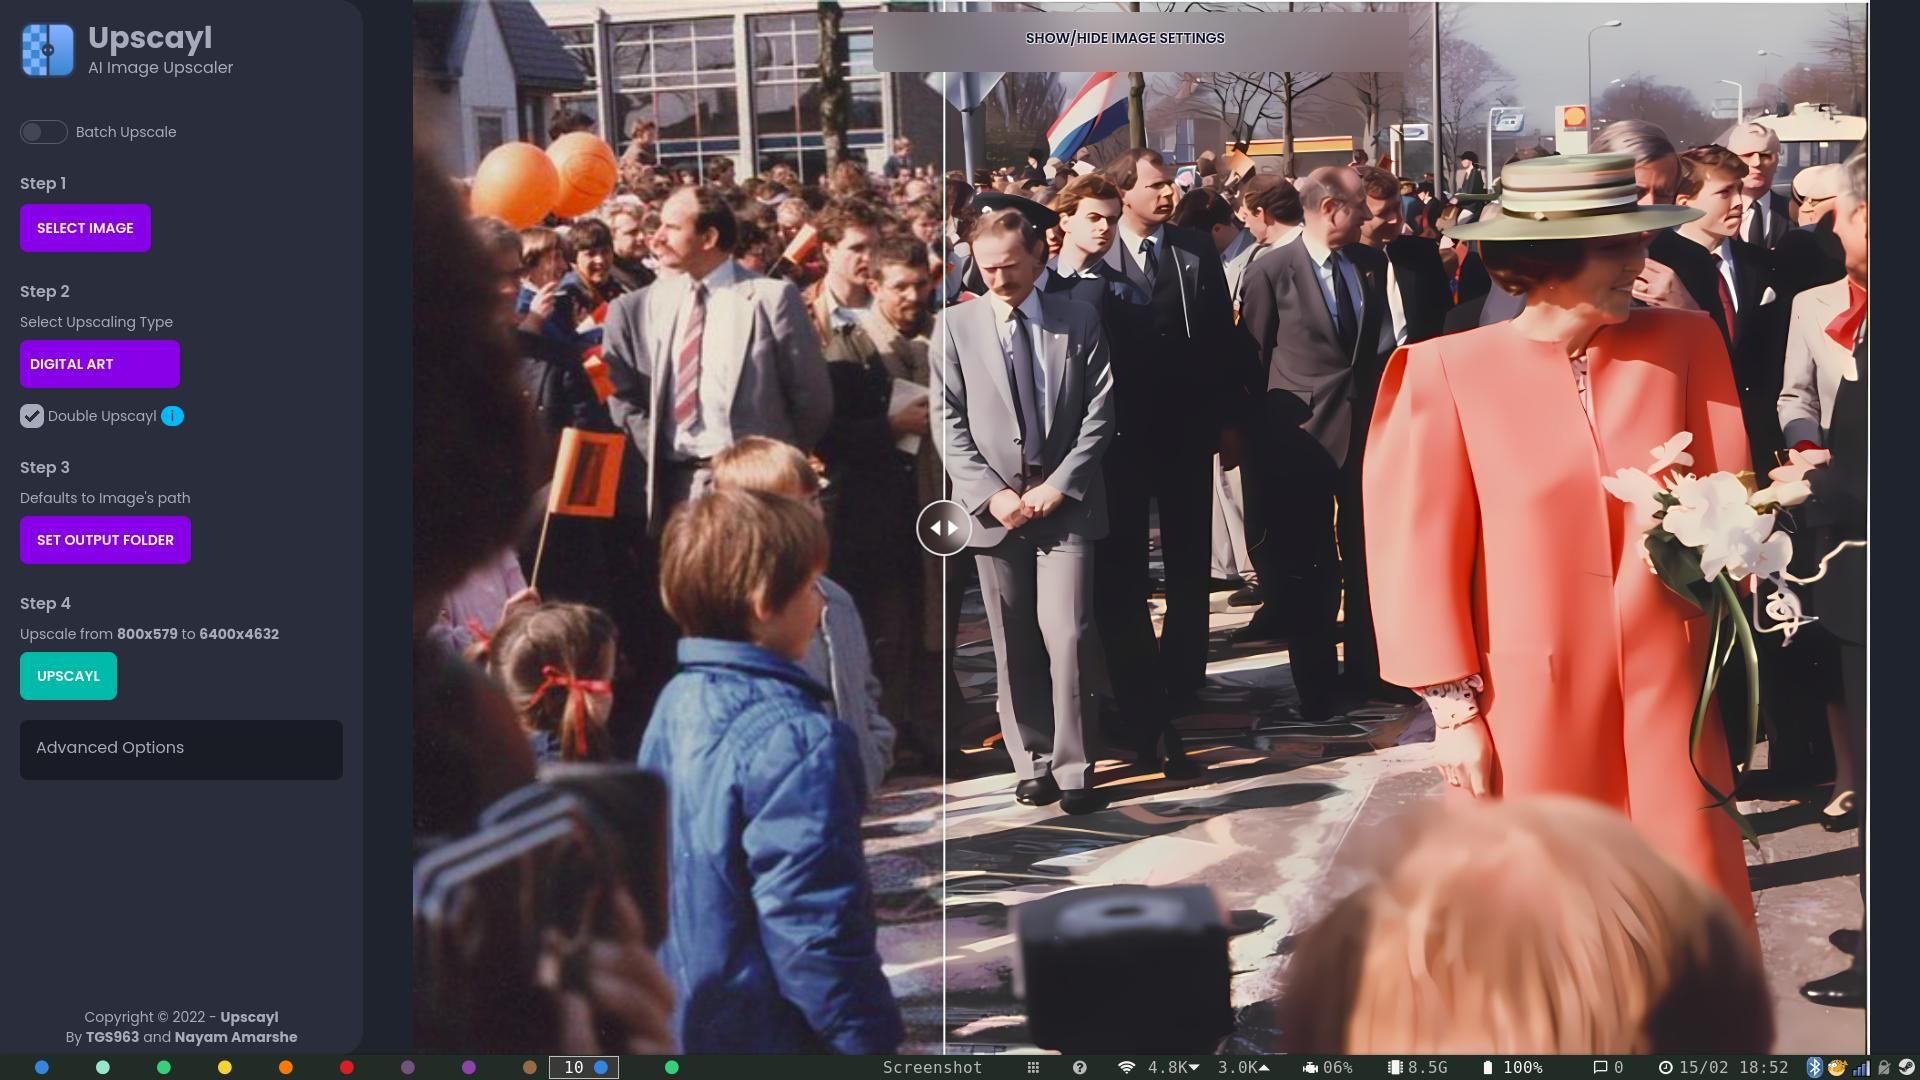 Upscayl interface showing Queen Beatrix of the Netherlands in 1986